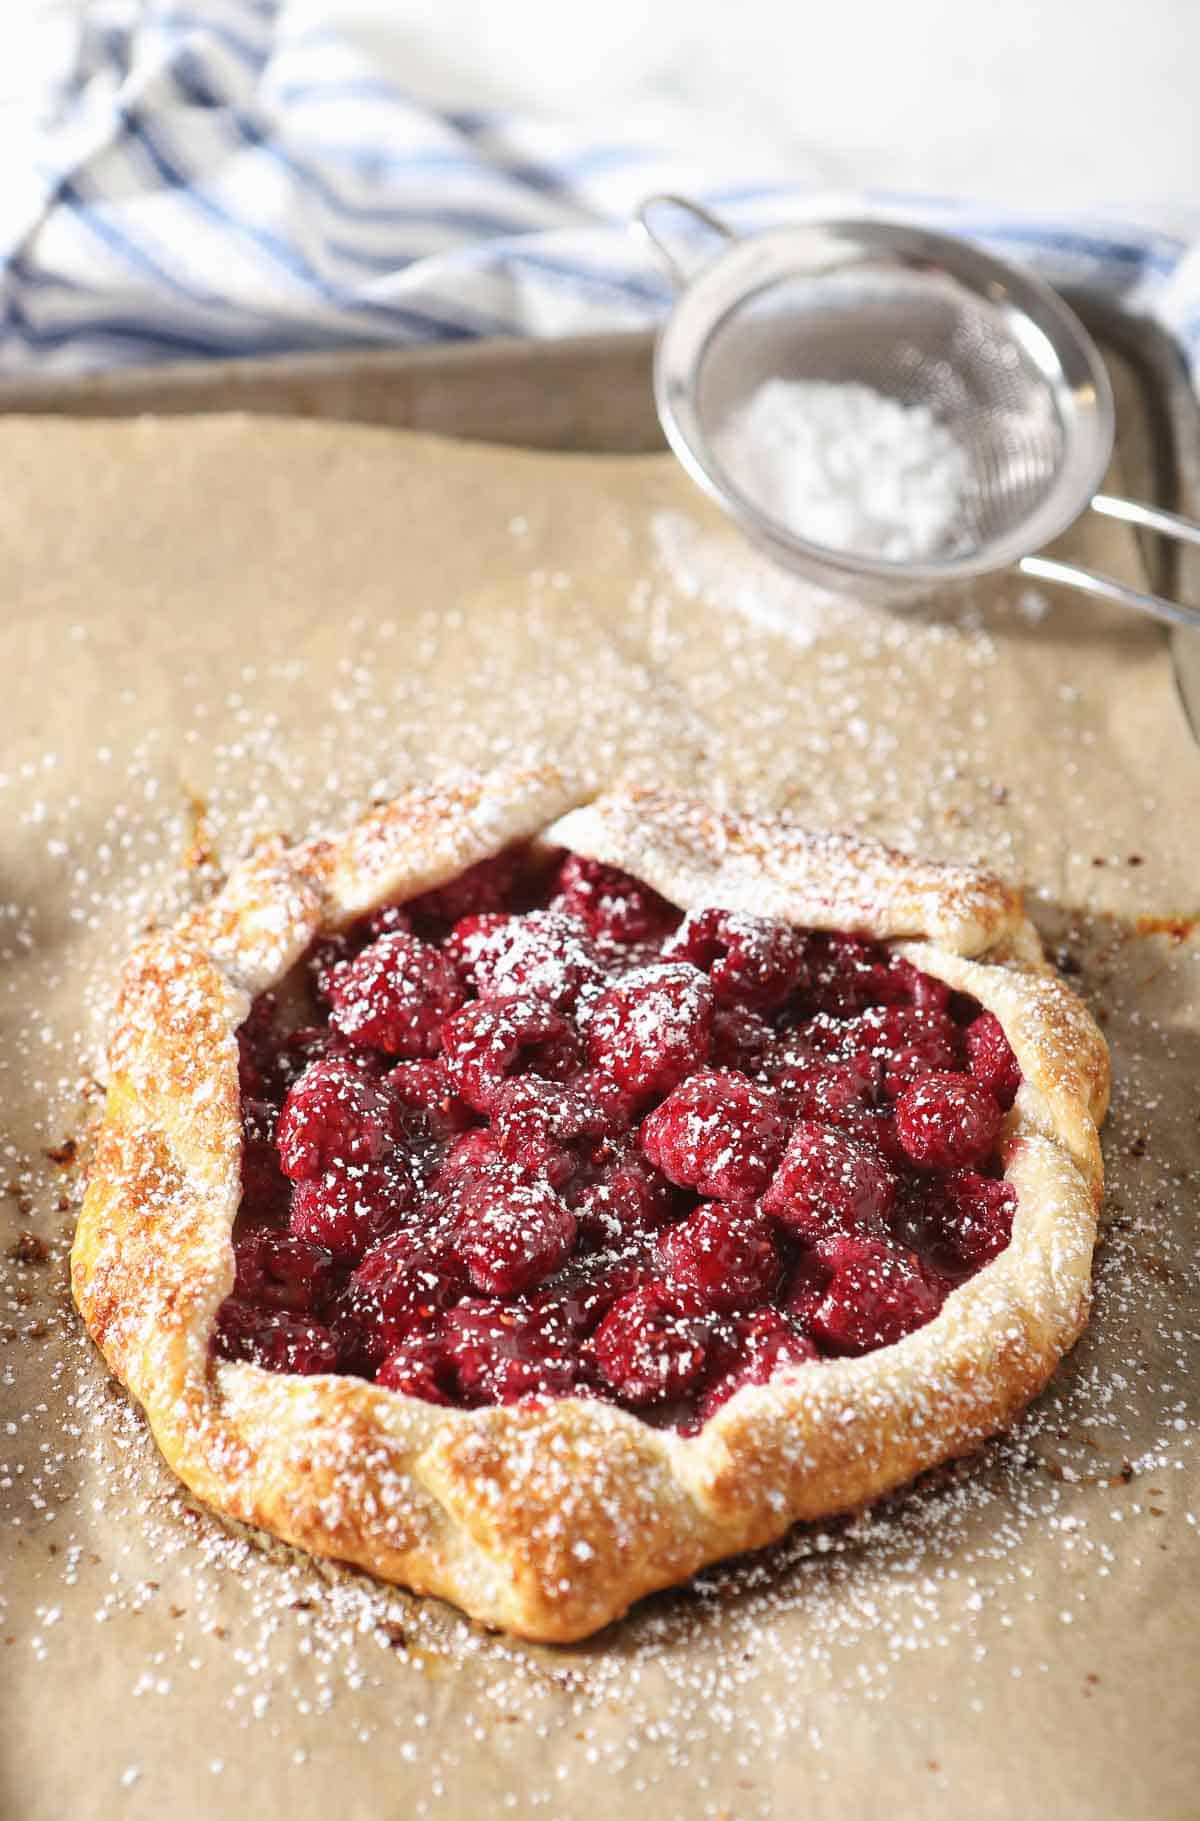 Small fresh raspberry galette dusted with powdered sugar.